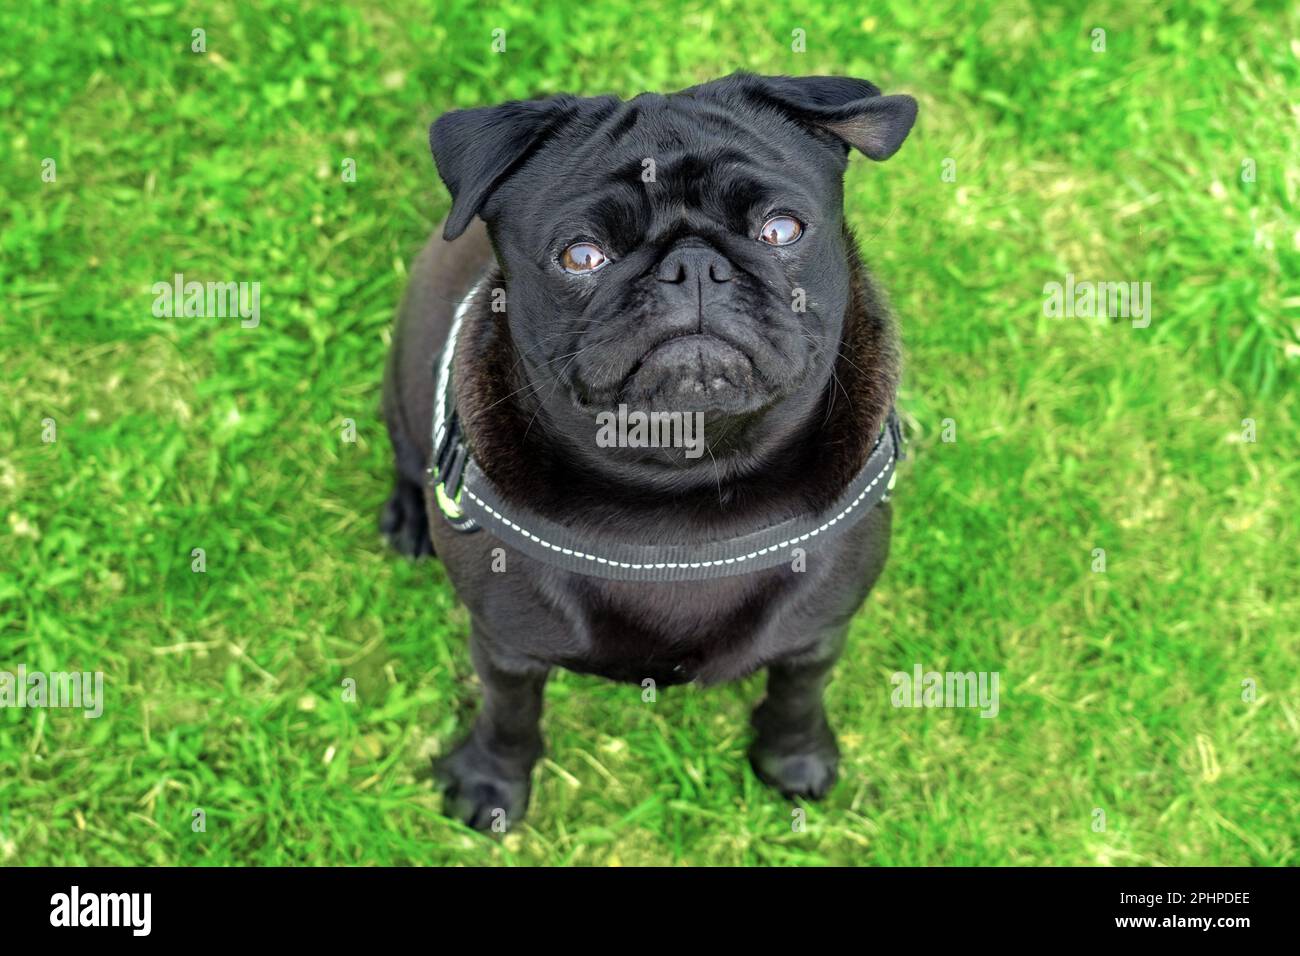 black mops pug dog sitting and looking up into the camera . Stock Photo